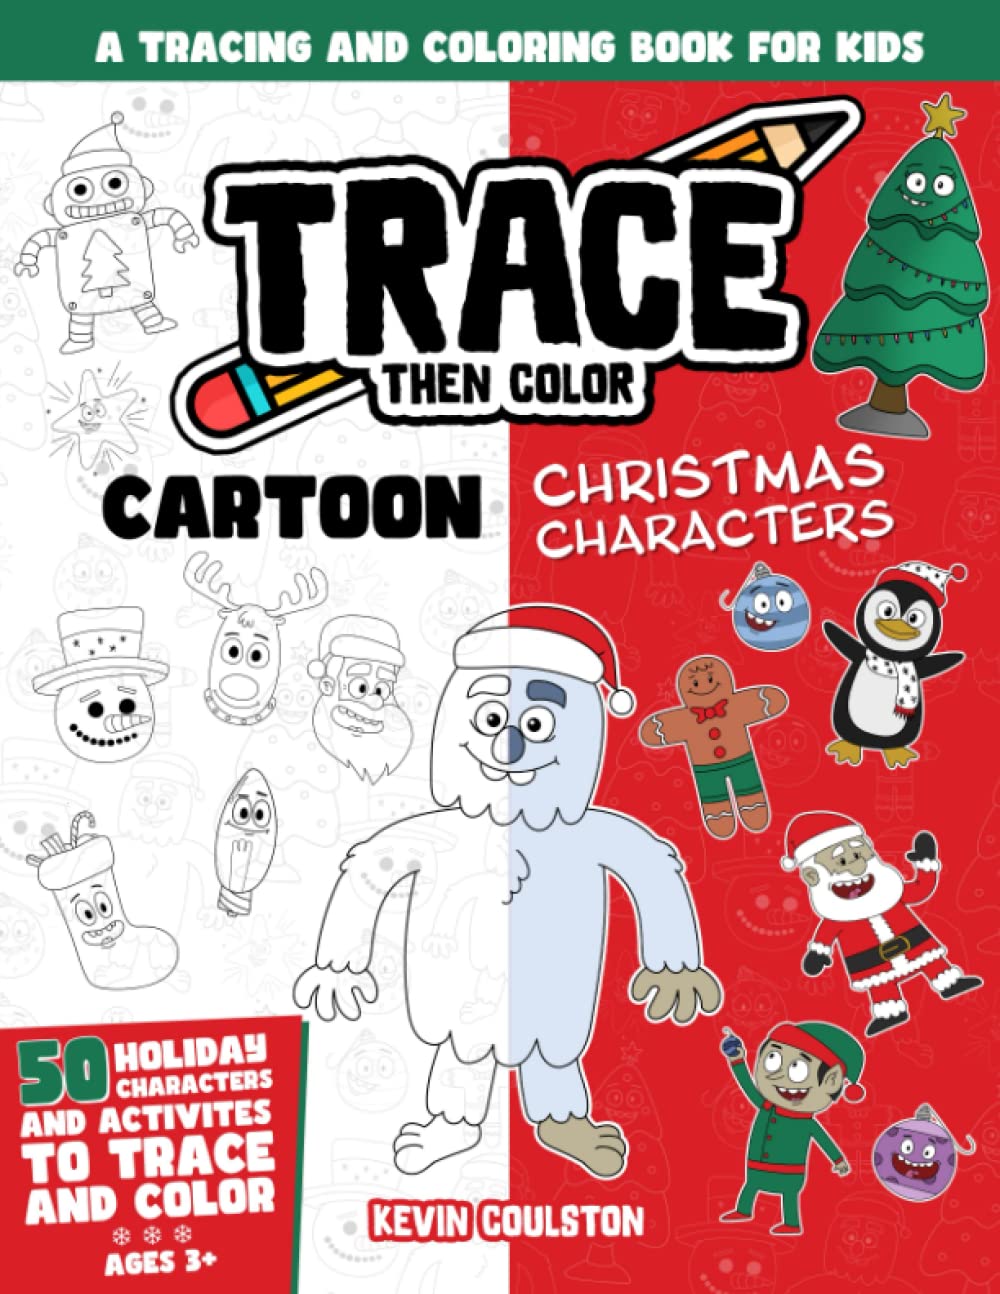 Trace Then Color: Cartoon Christmas Characters